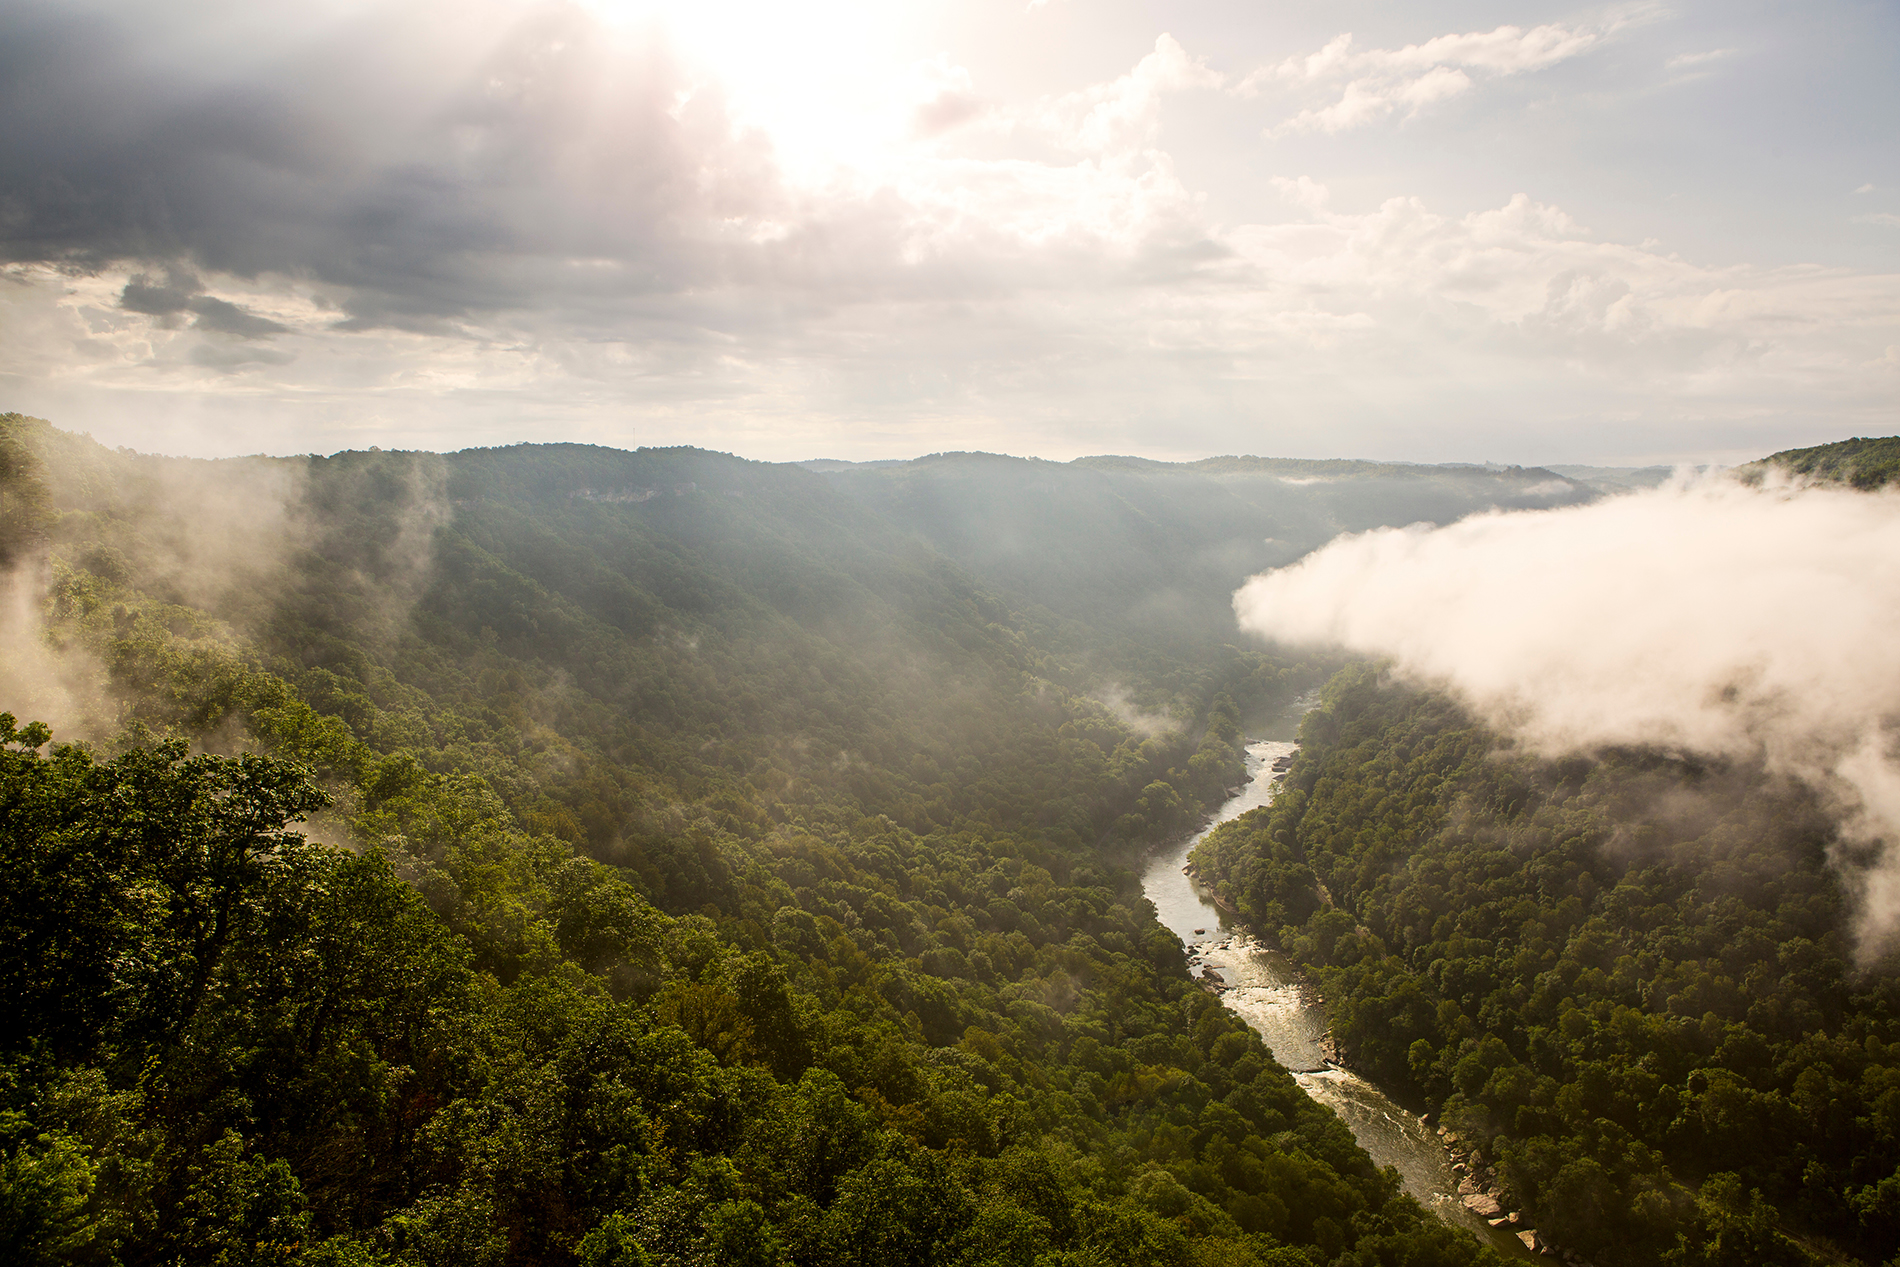 The sun rises over the New River Gorge on a misty, rainy morning in West Virginia